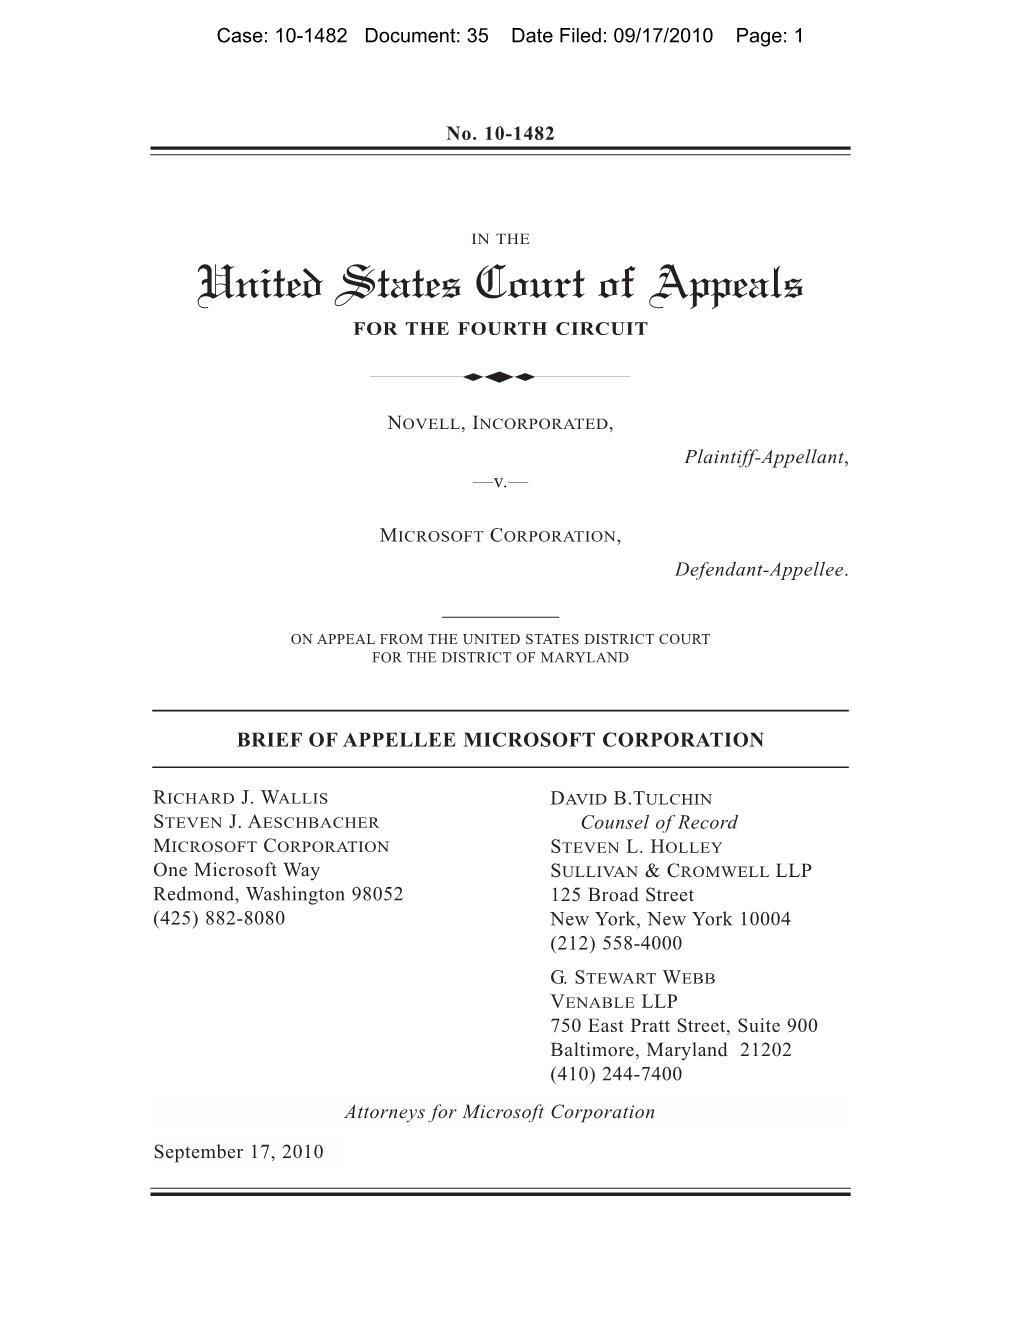 United States Court of Appeals for the FOURTH CIRCUIT